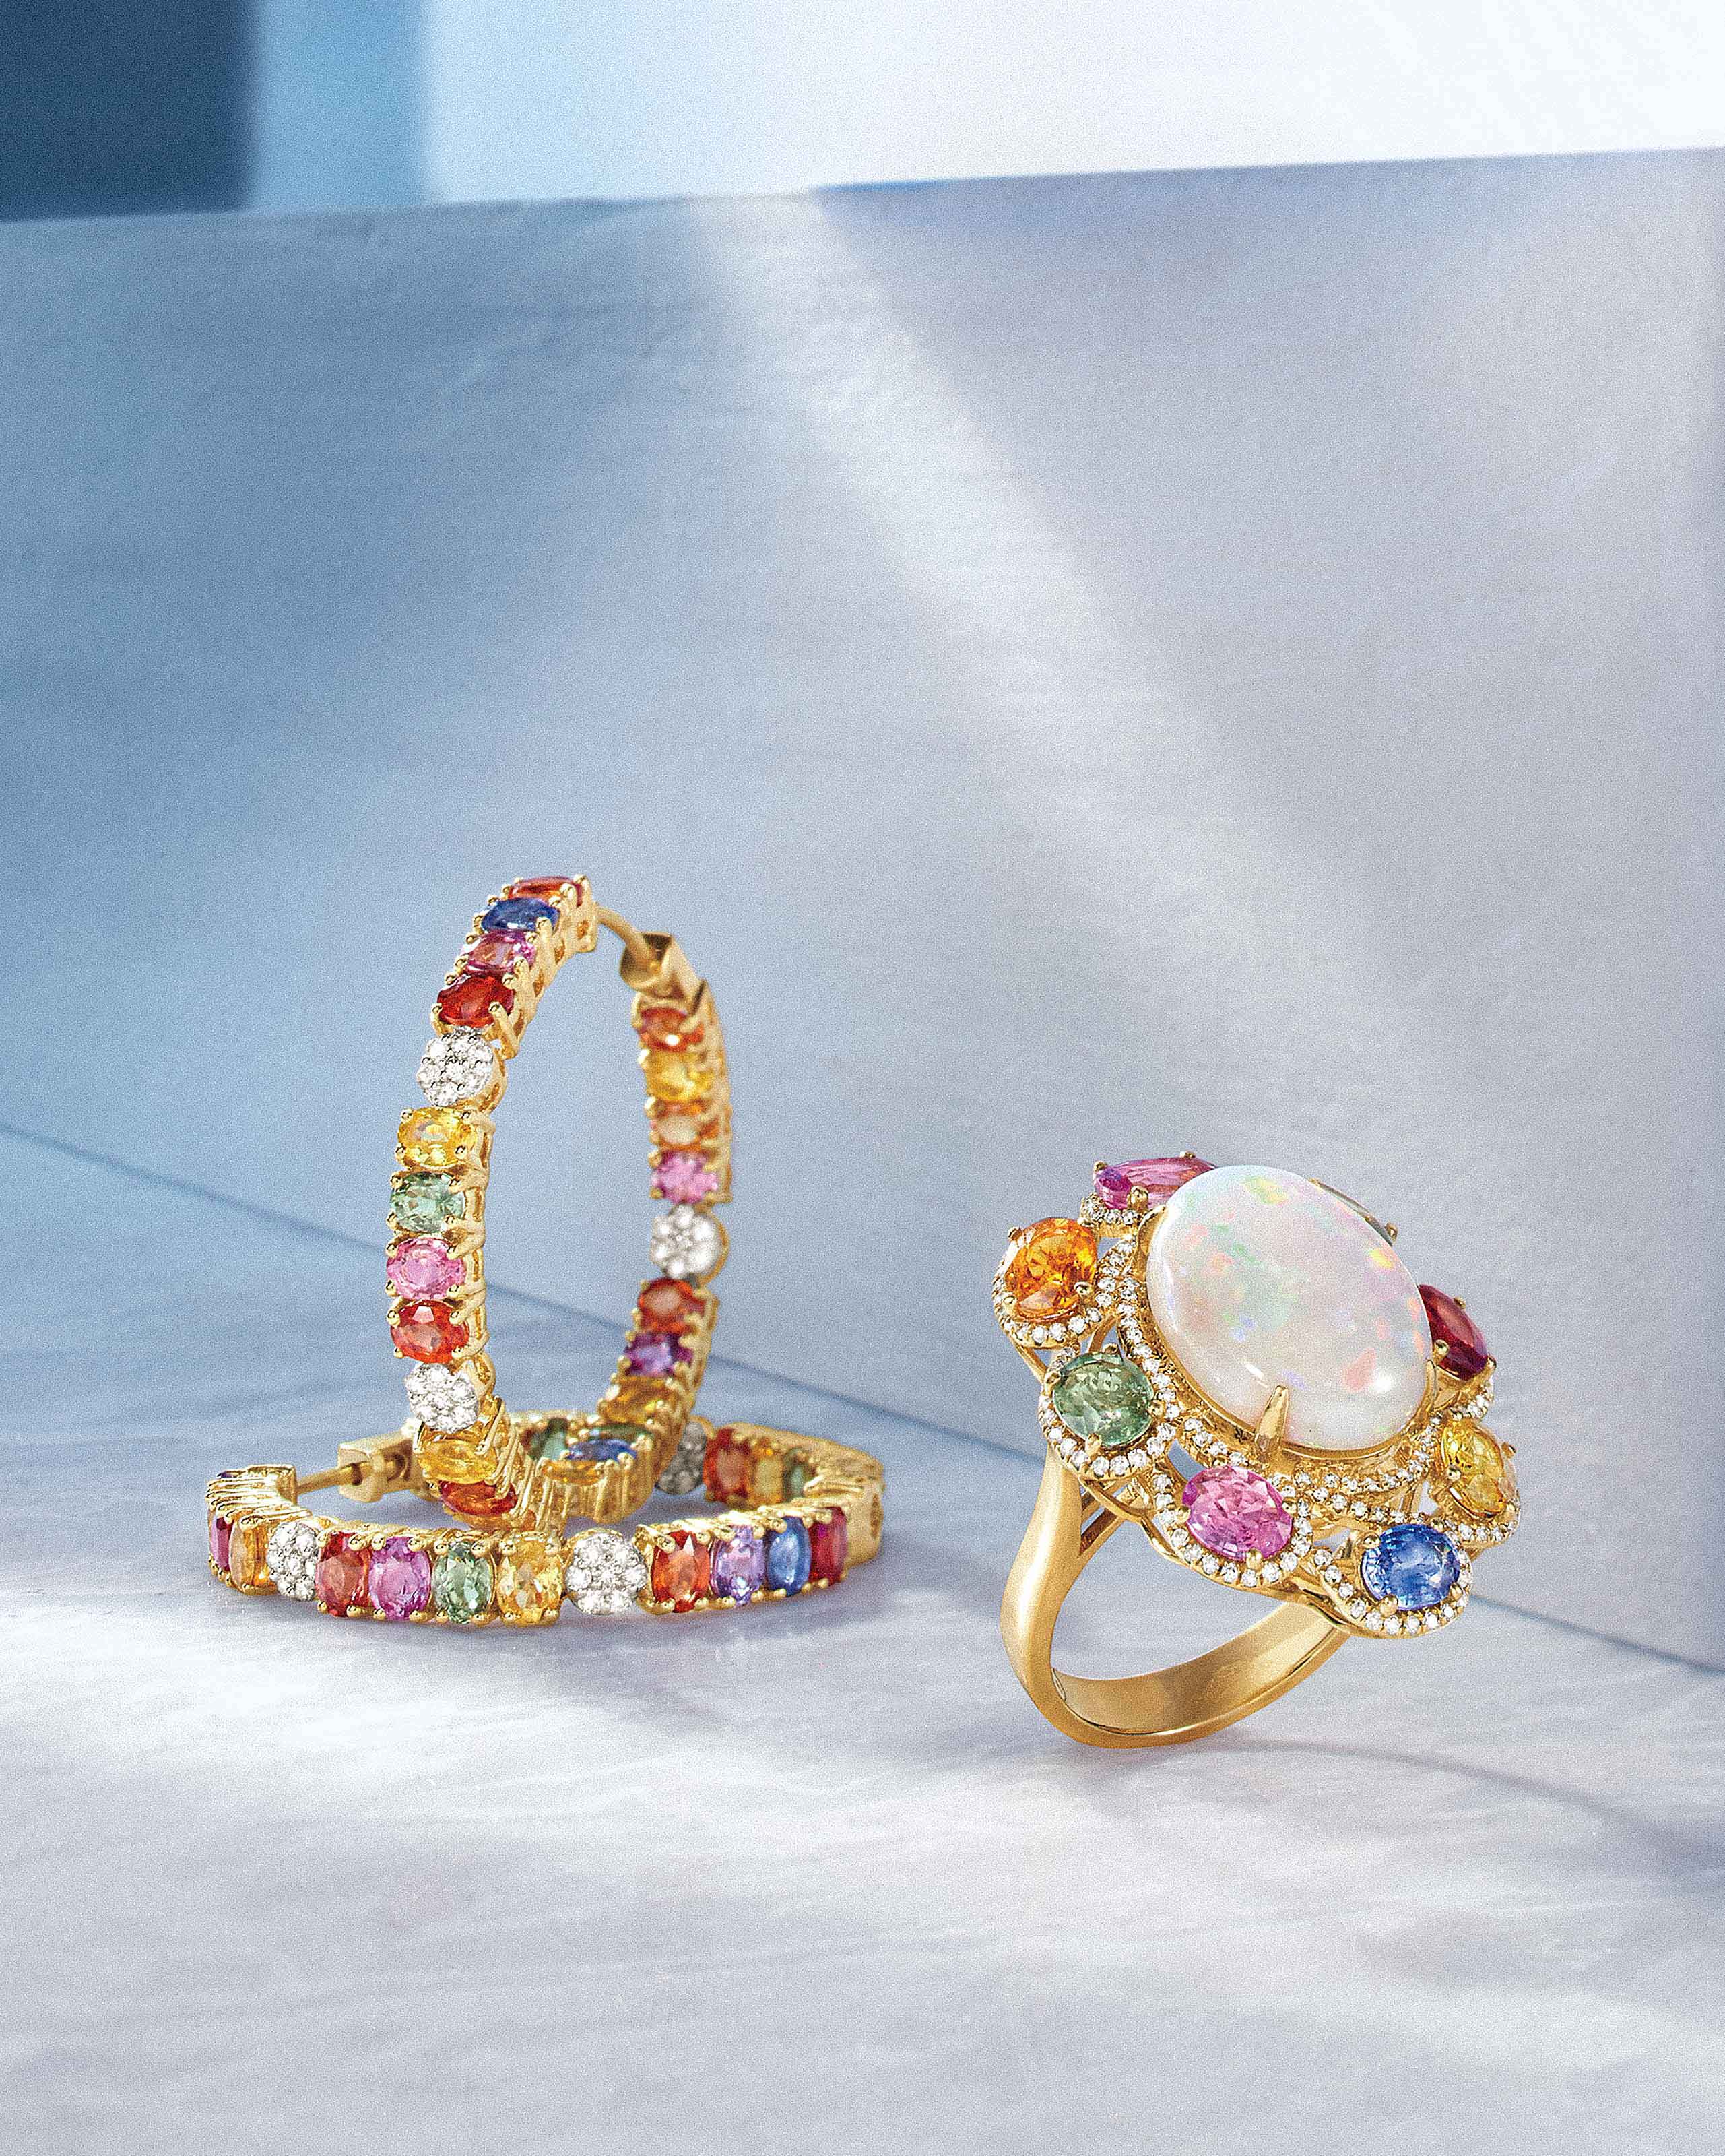 Jewelry photograph of high end luxury goods